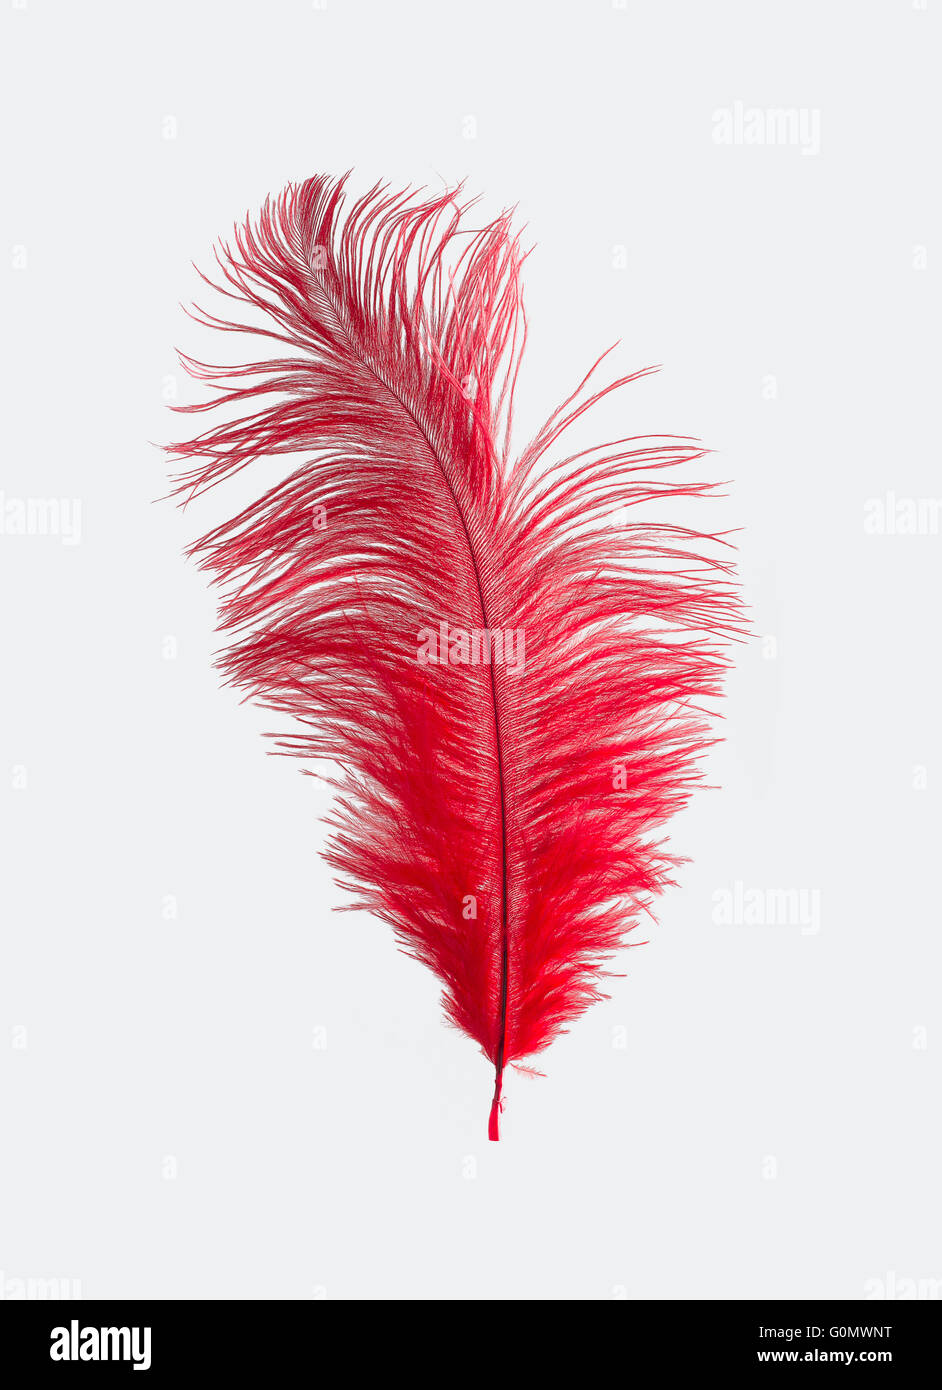 Red feathers Stock Photos, Royalty Free Red feathers Images